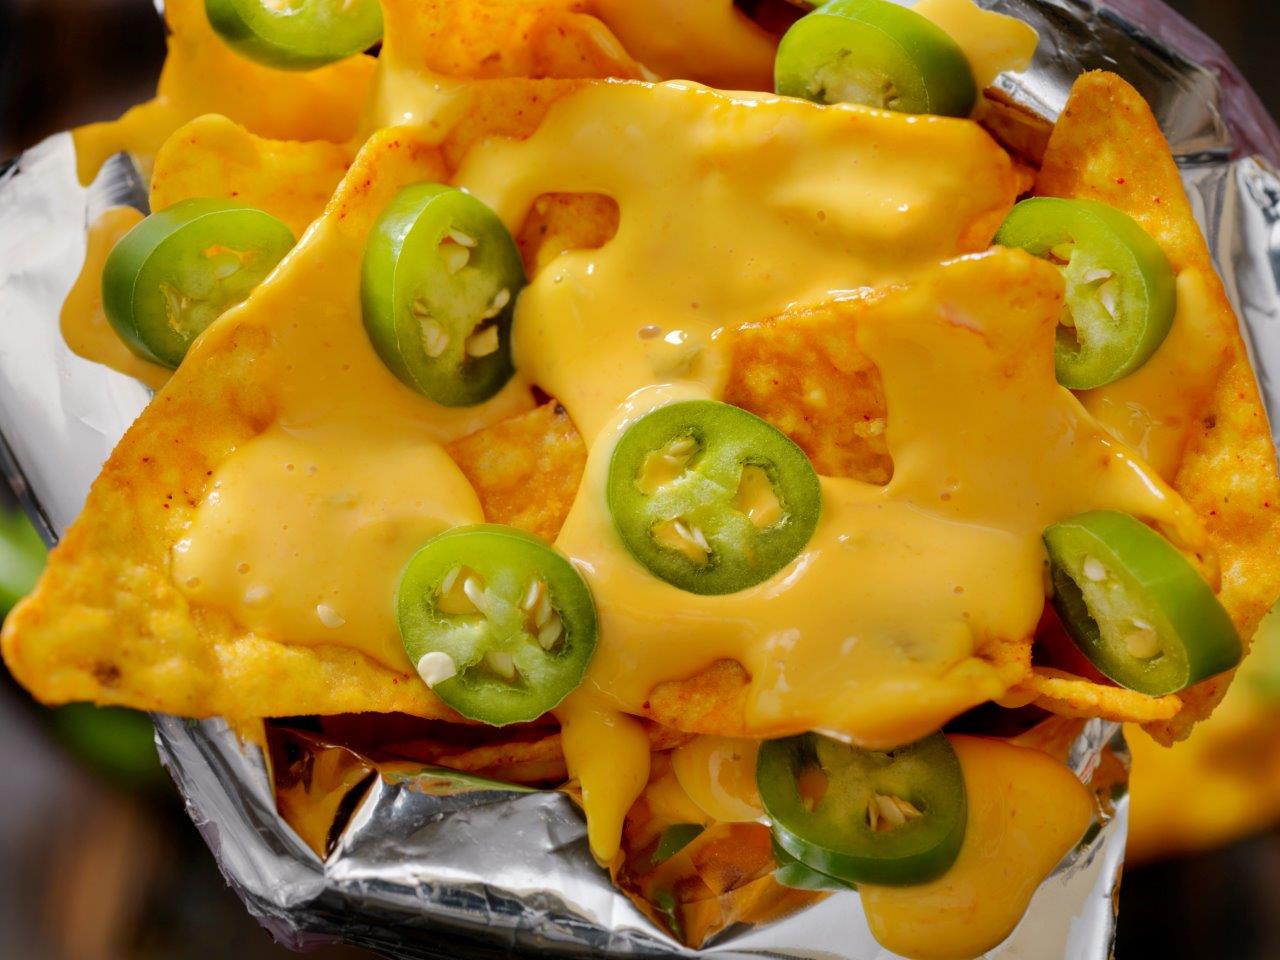 Nacho-Tortilla-Chips-in-a-bag-with-Cheese-Sauce-and-Jalapenos ...